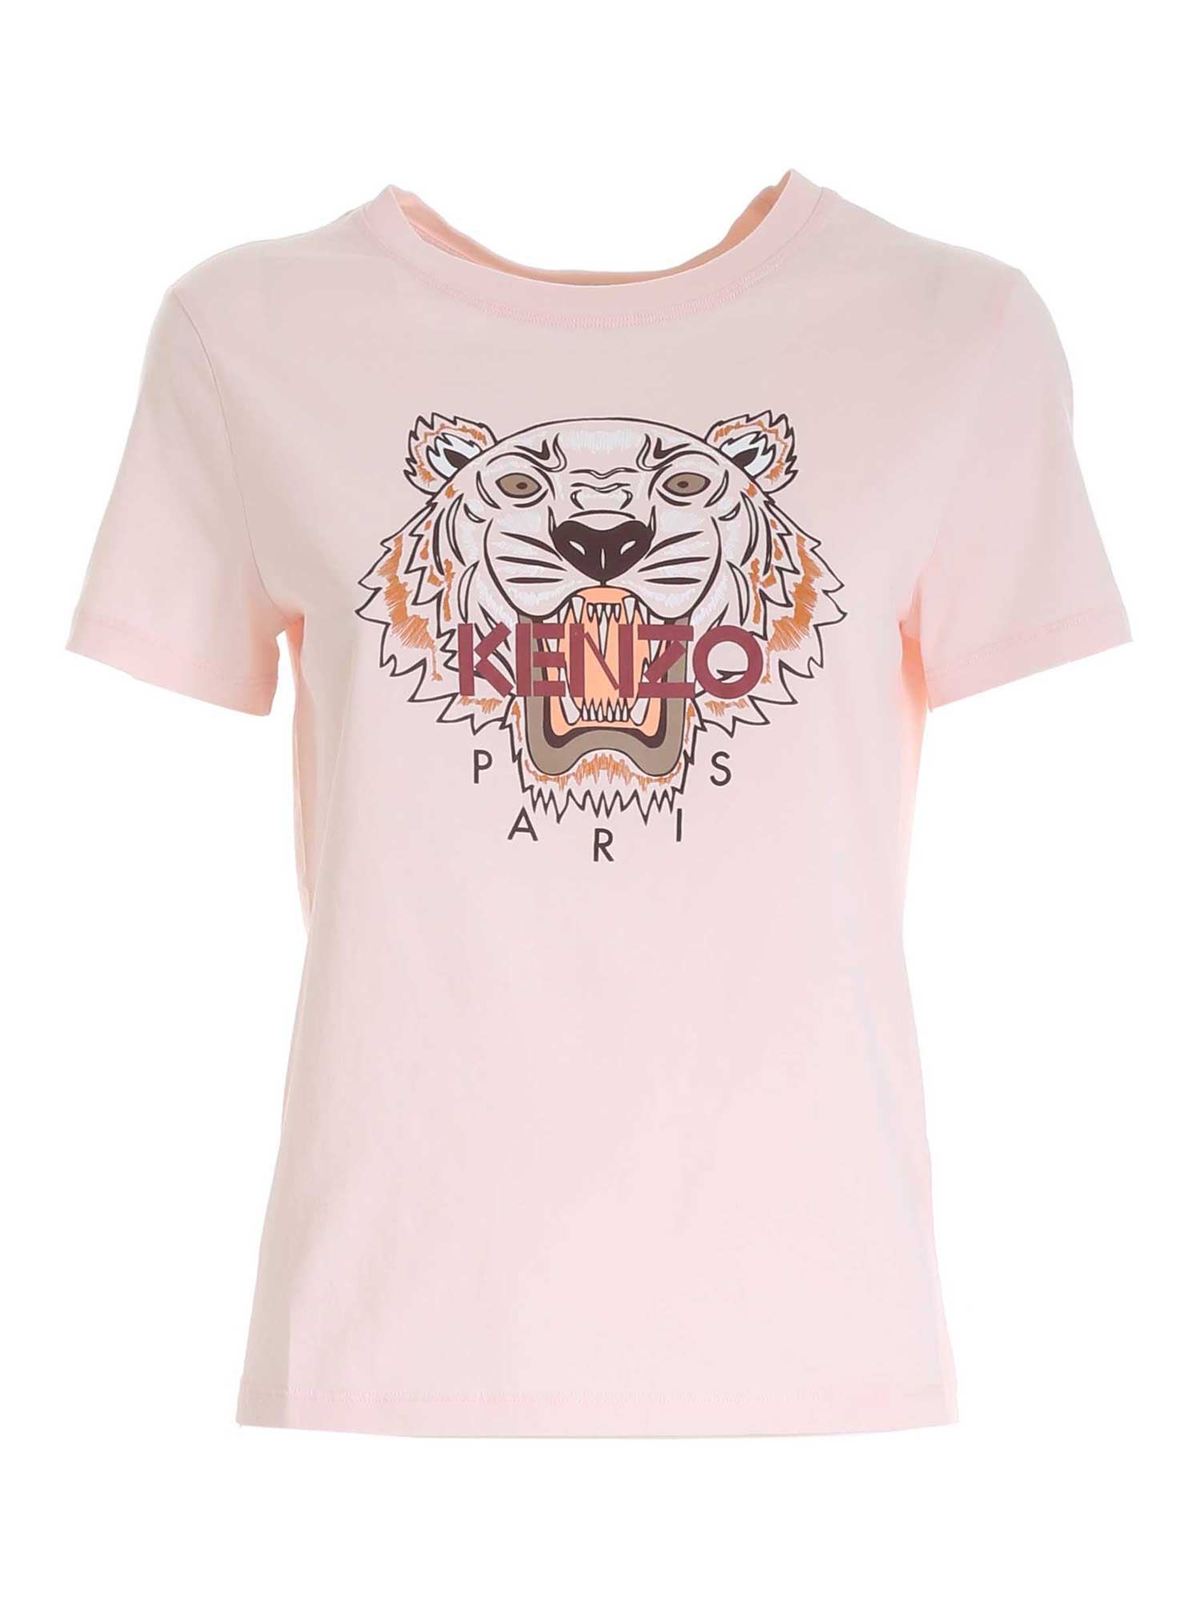 Tシャツ Kenzo - Tシャツ - ピンク - FB62TS8464YB34 | THEBS [iKRIX]